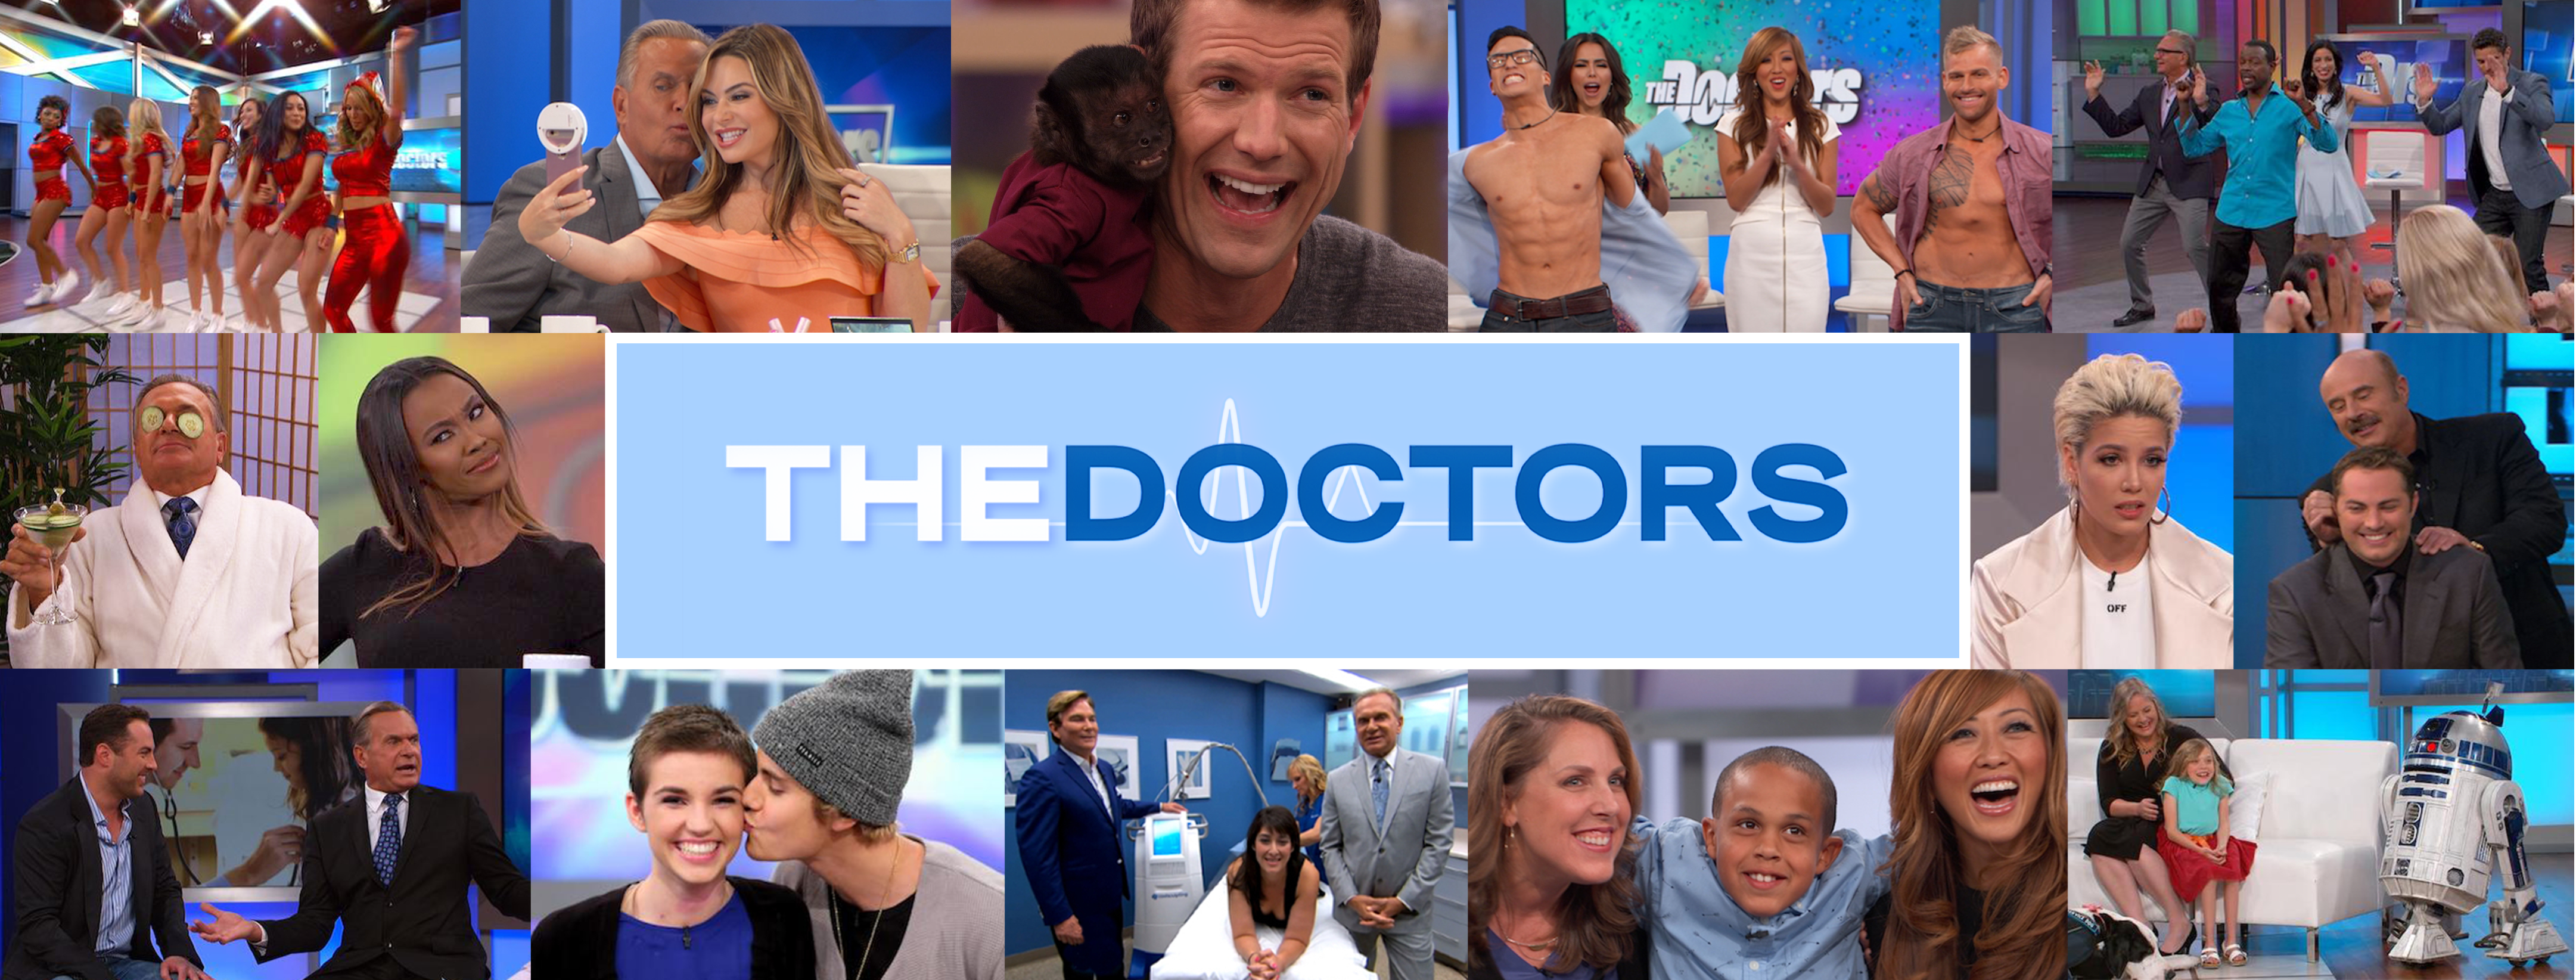 Splinter Removal with a Syringe? | The Doctors TV Show